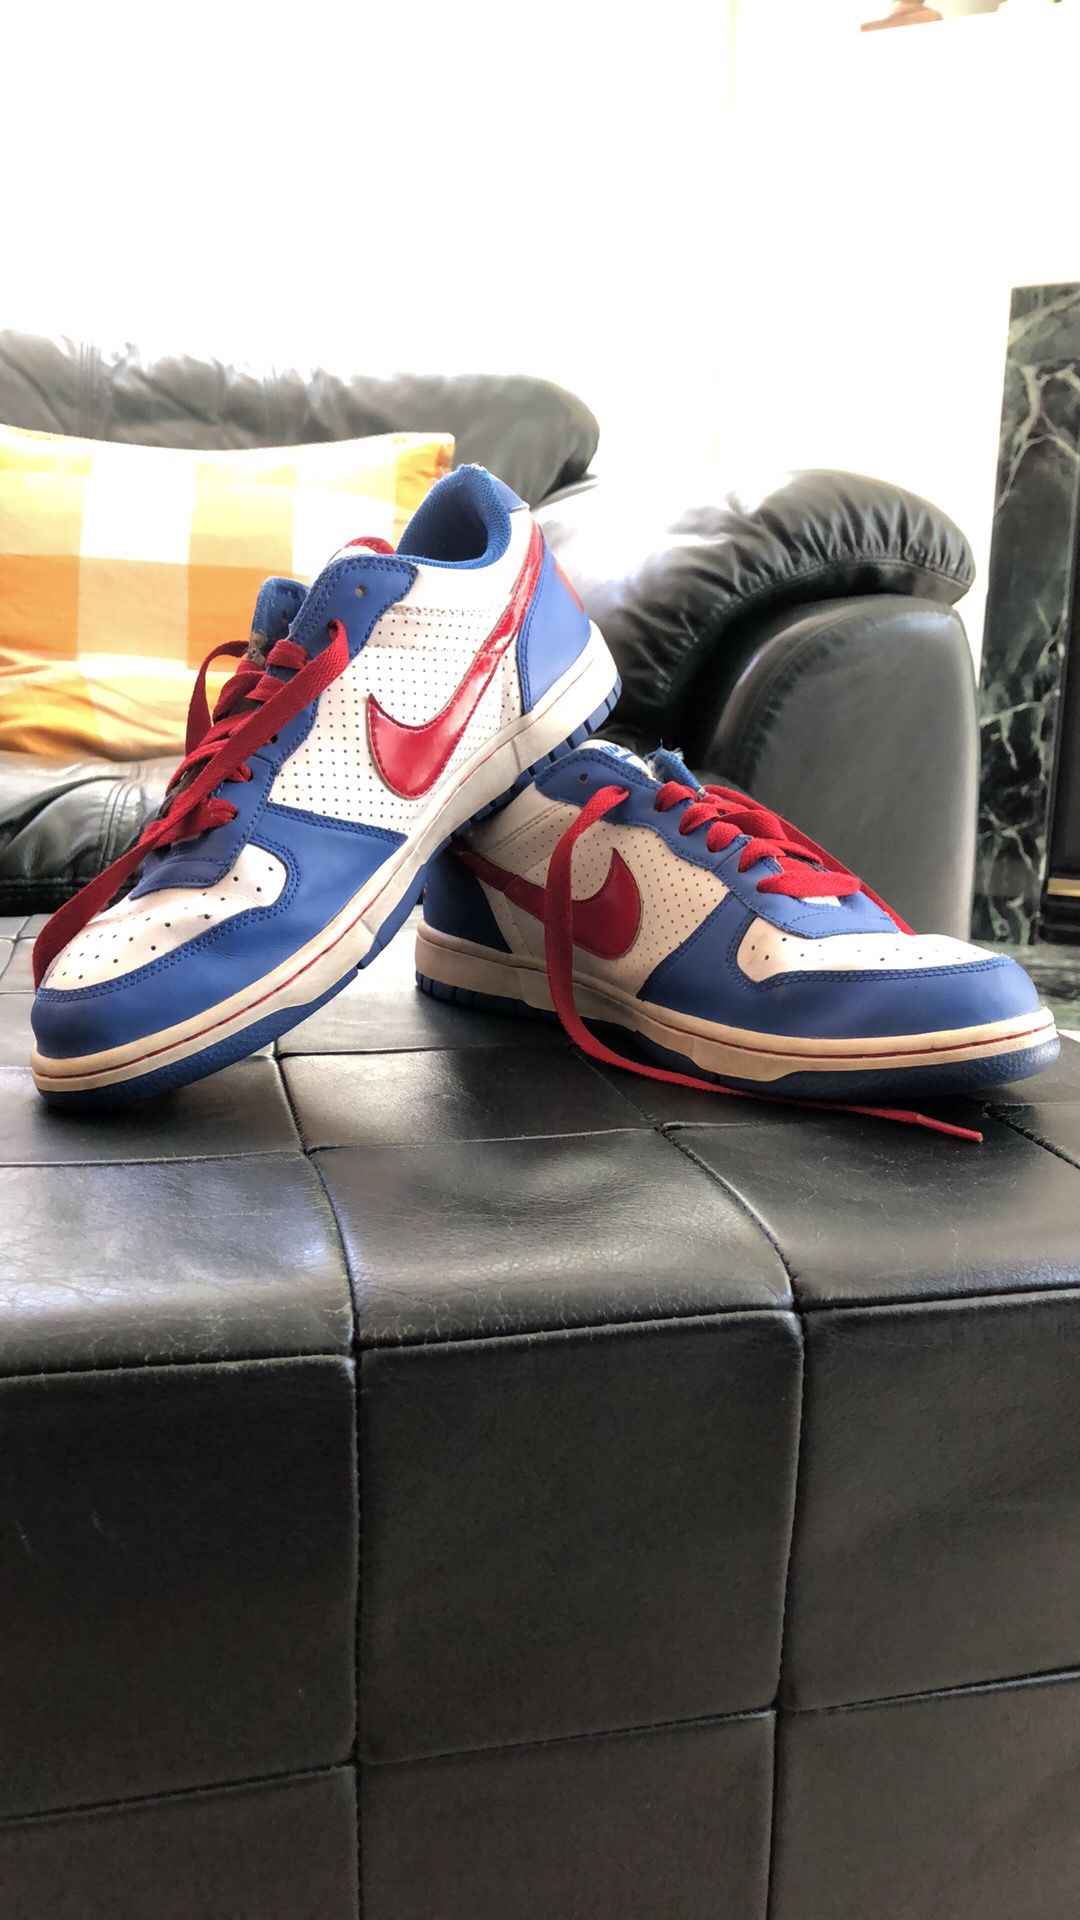 Big Nike Low OGs (Red, White and Blue) size 9